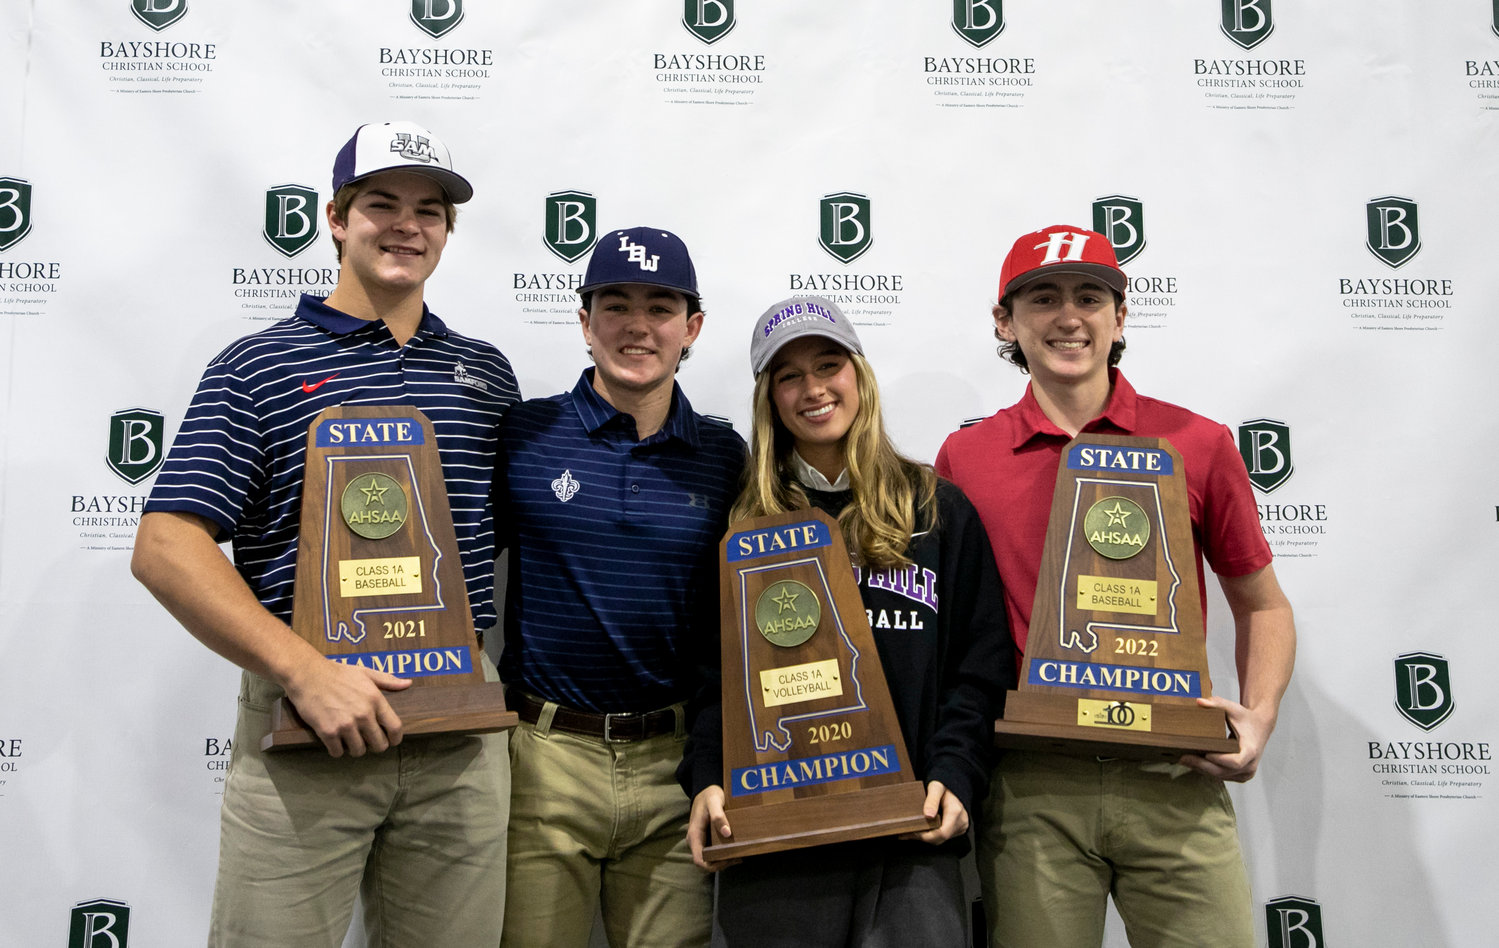 State champions and all-state athletes were recognized Wednesday afternoon at Bayshore Christian School with a signing ceremony. John Malone (Samford), Streed Crooms (Lurleen B. Wallace), Ashlyn Whiteside (Spring Hill) and Mikael Bryant (Huntingdon) made up the Eagles’ largest athletic signing class in school history.